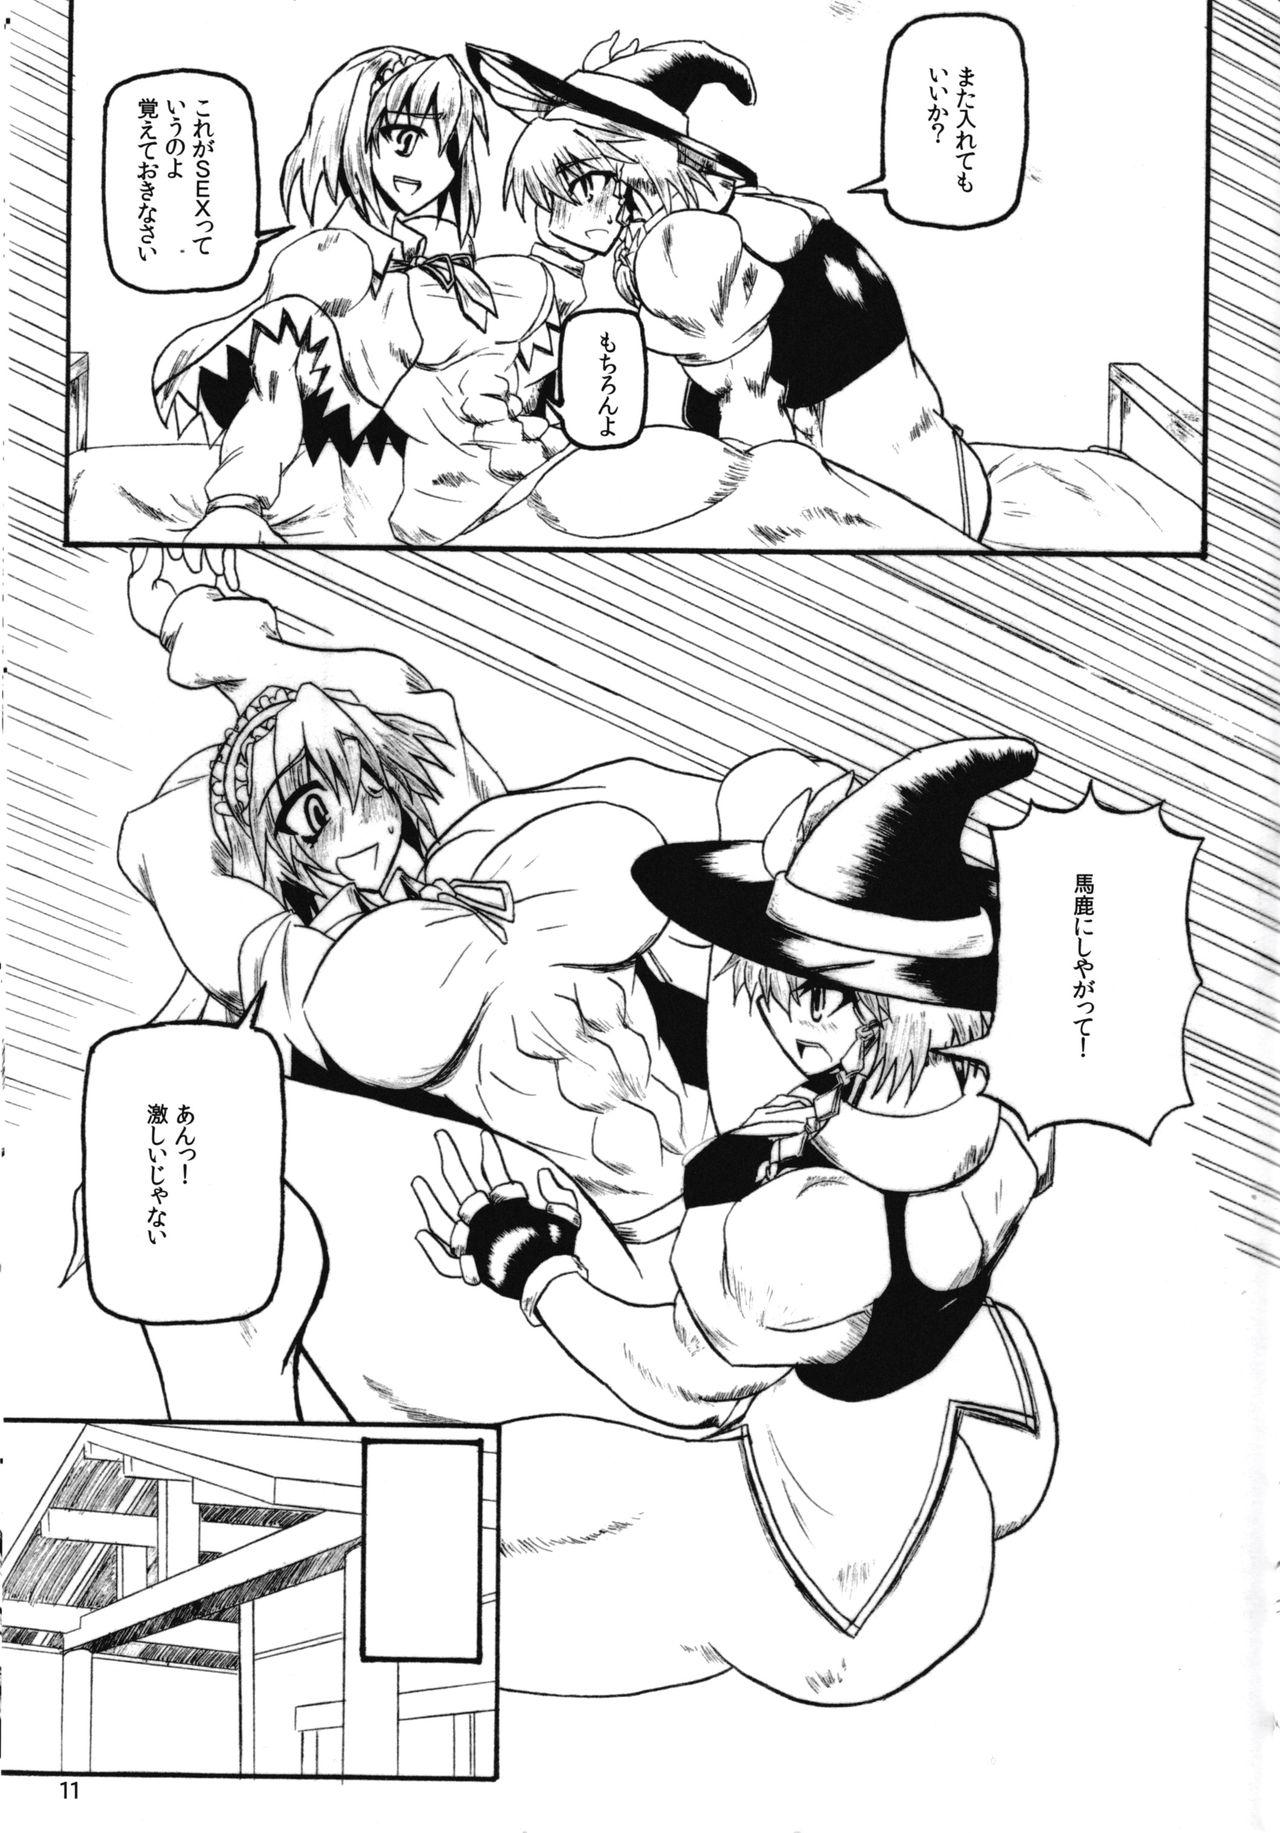 Slave Exceeds Power of Human2 - Touhou project Cougars - Page 11